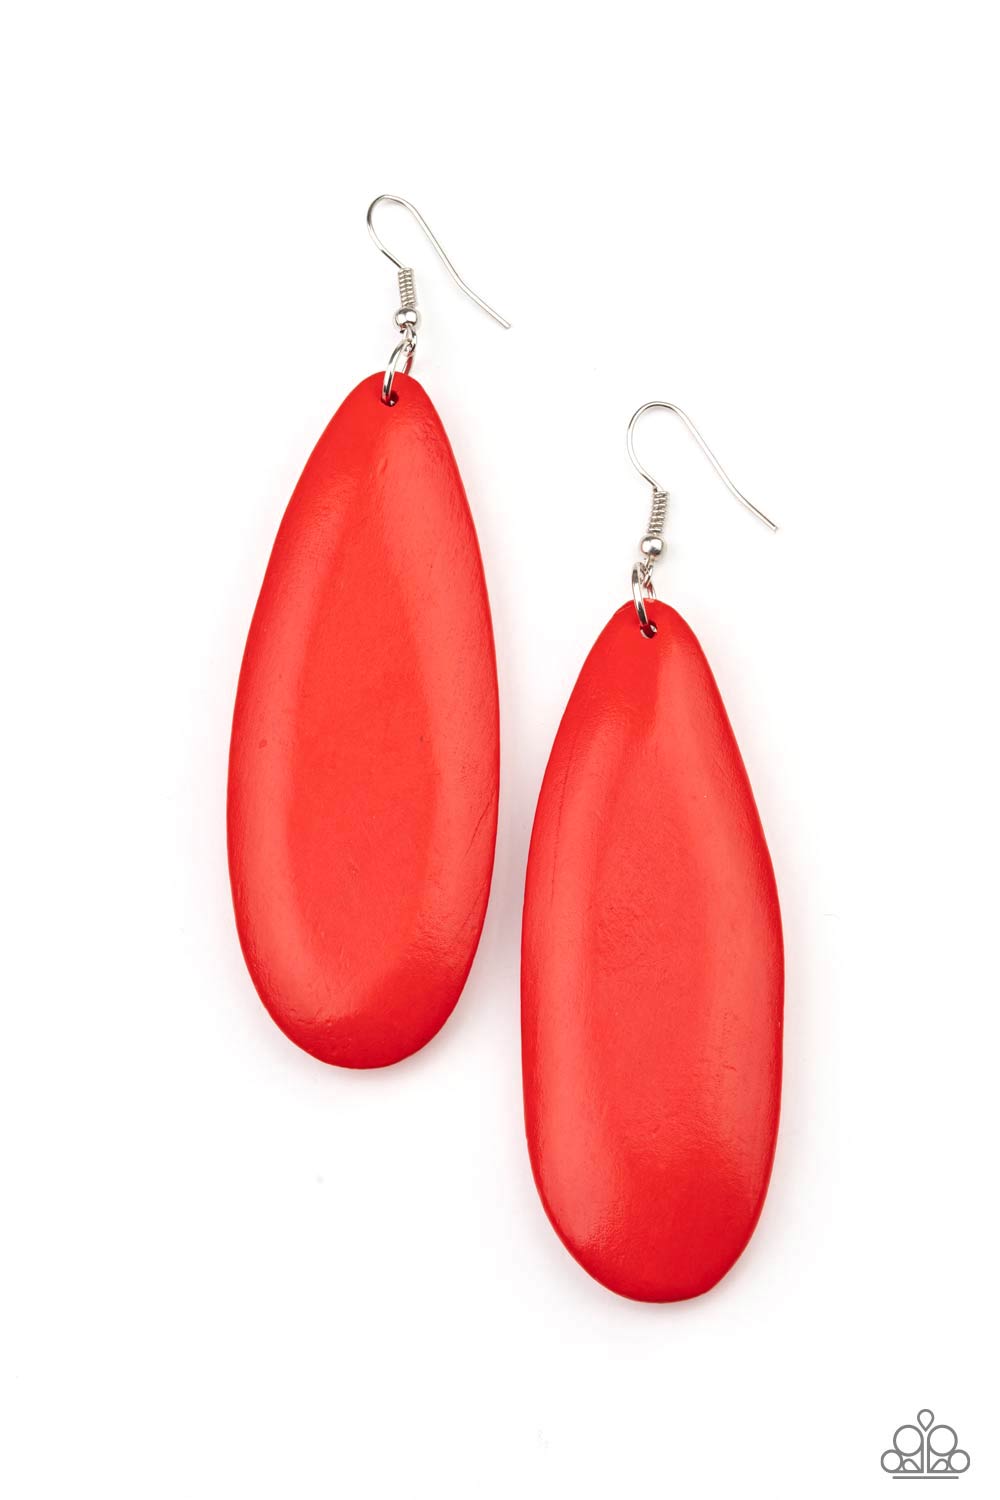 &lt;P&gt;Painted in a shiny red finish, an imperfect wooden teardrop swings from the ear for a tropical inspired look. Earring attaches to a standard fishhook fitting.&lt;/P&gt;  

&lt;P&gt; &lt;I&gt;  Sold as one pair of earrings. &lt;/I&gt;  &lt;/P&gt;

&lt;img src=\&quot;https://d9b54x484lq62.cloudfront.net/paparazzi/shopping/images/517_tag150x115_1.png\&quot; alt=\&quot;New Kit\&quot; align=\&quot;middle\&quot; height=\&quot;50\&quot; width=\&quot;50\&quot;/&gt;